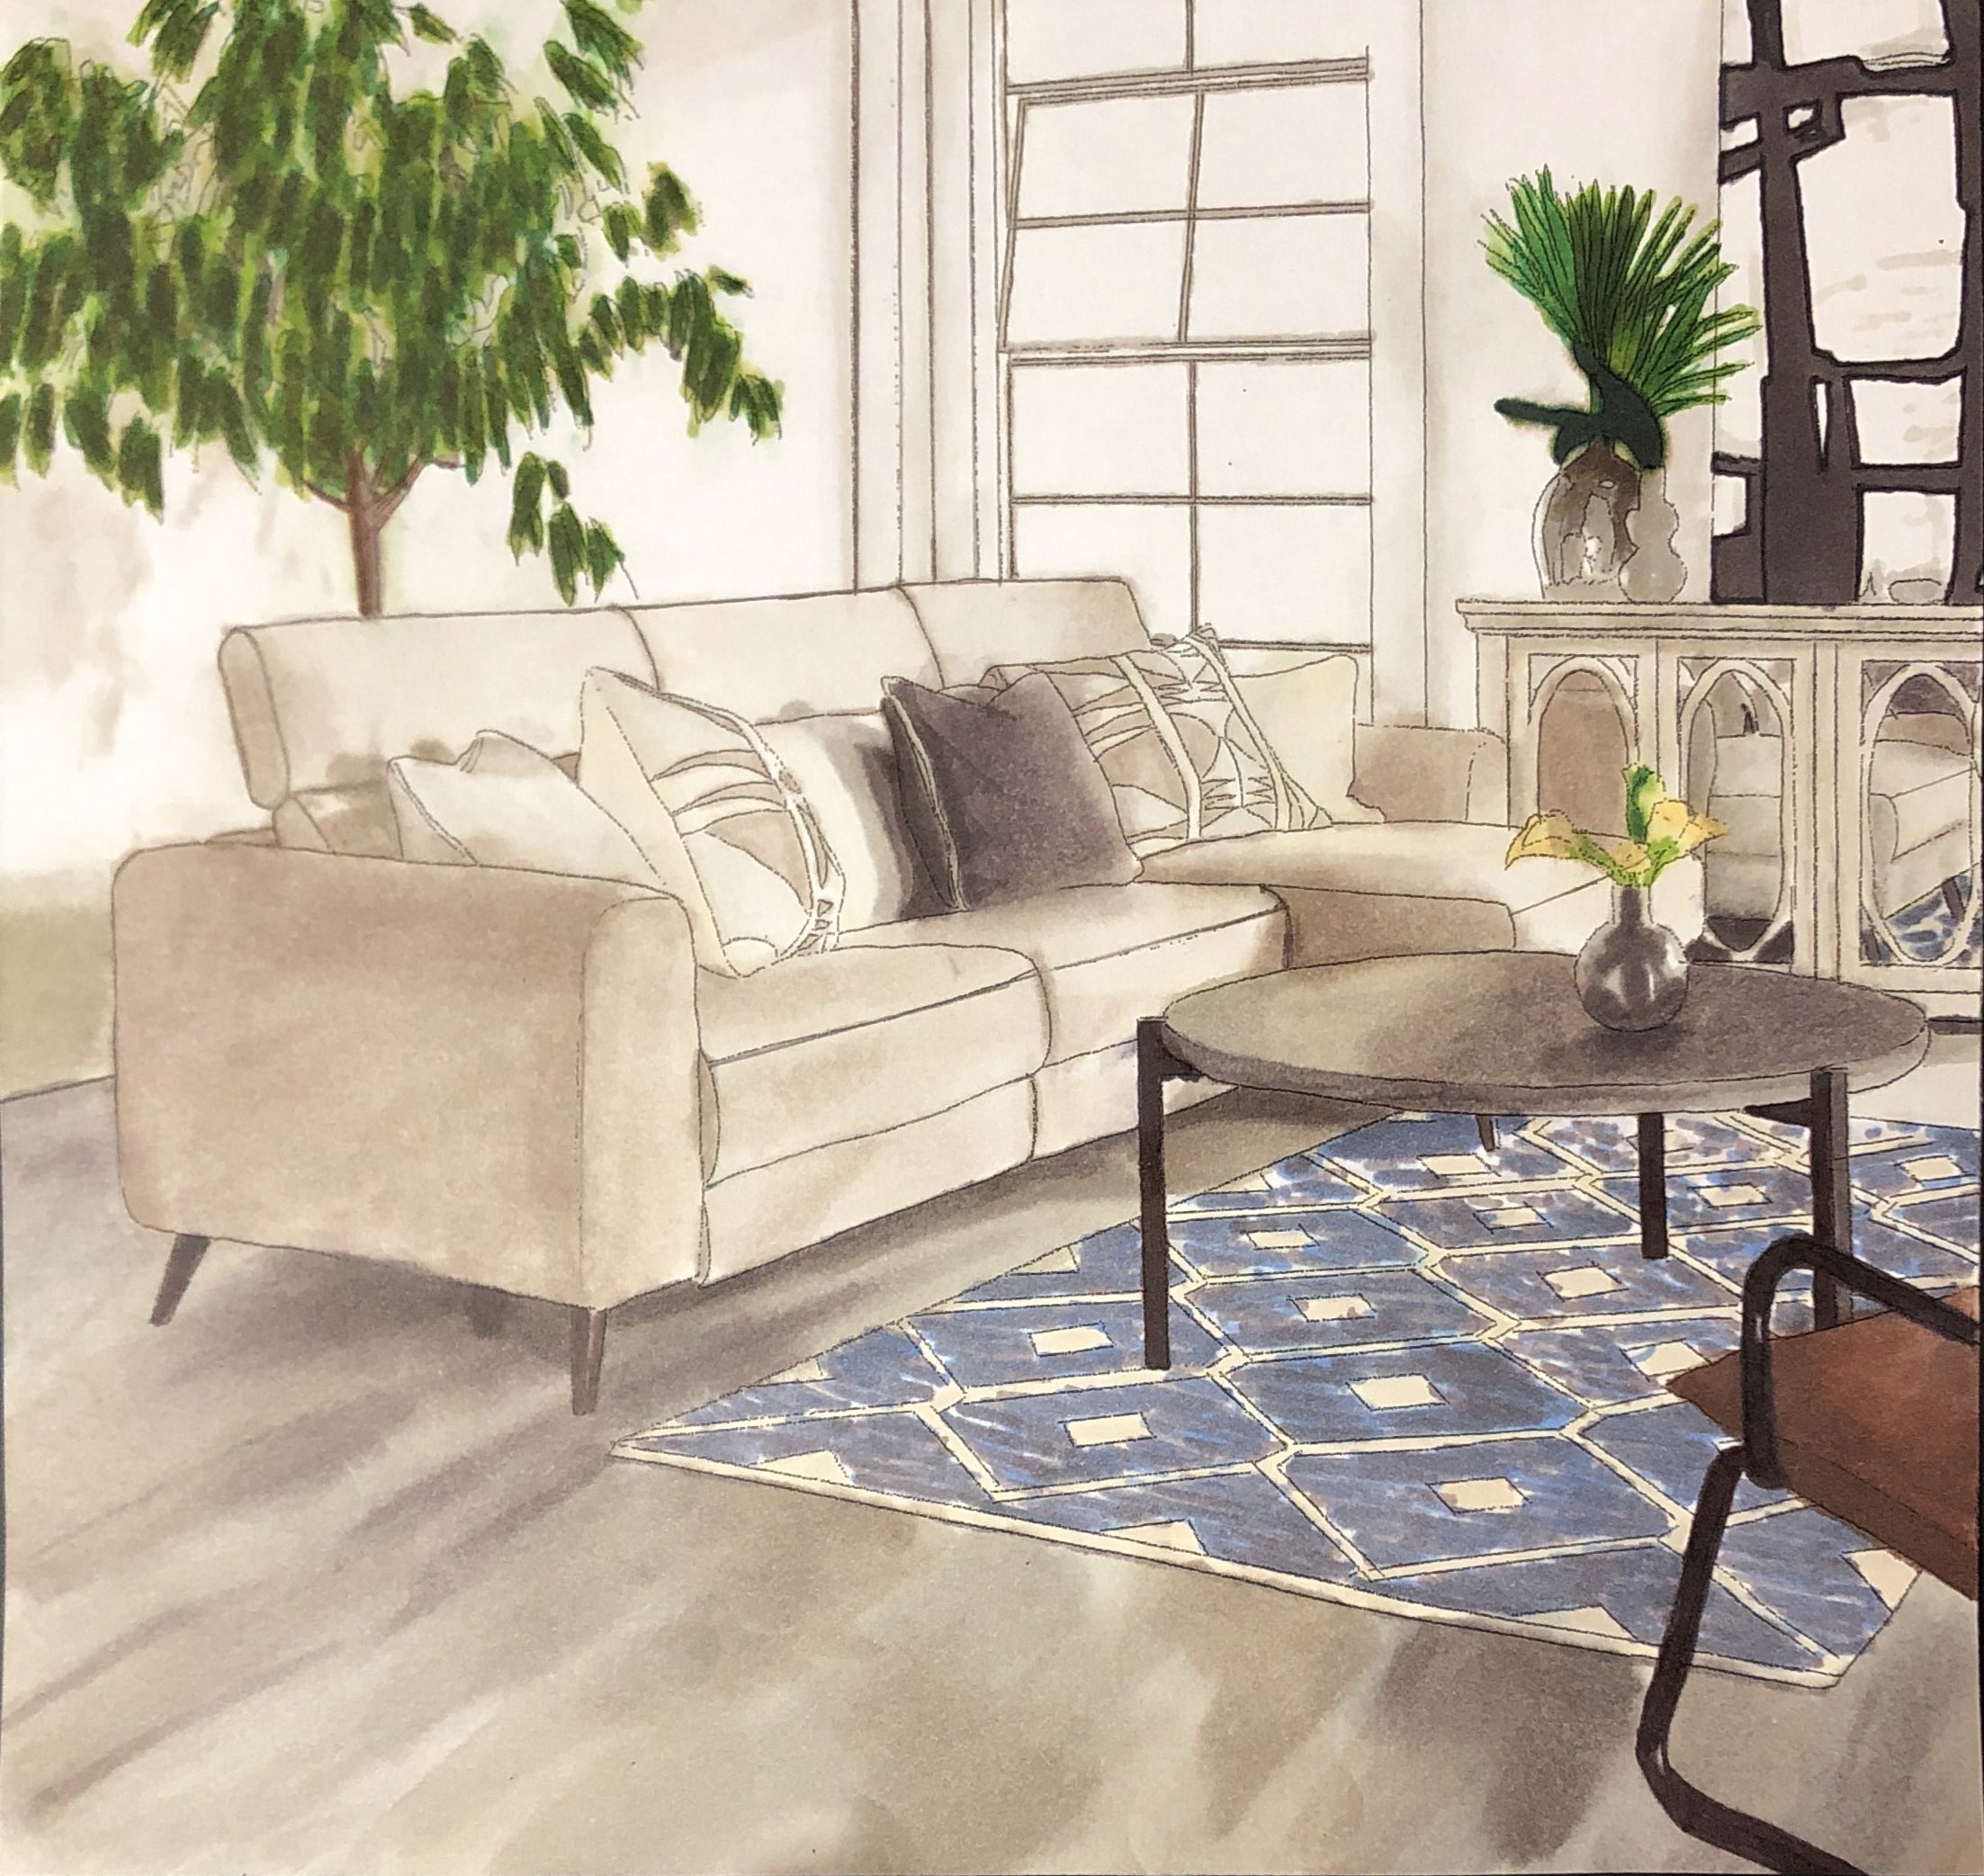 Hand rendering of a living room with sofa, carpet, coffee table, and plants.